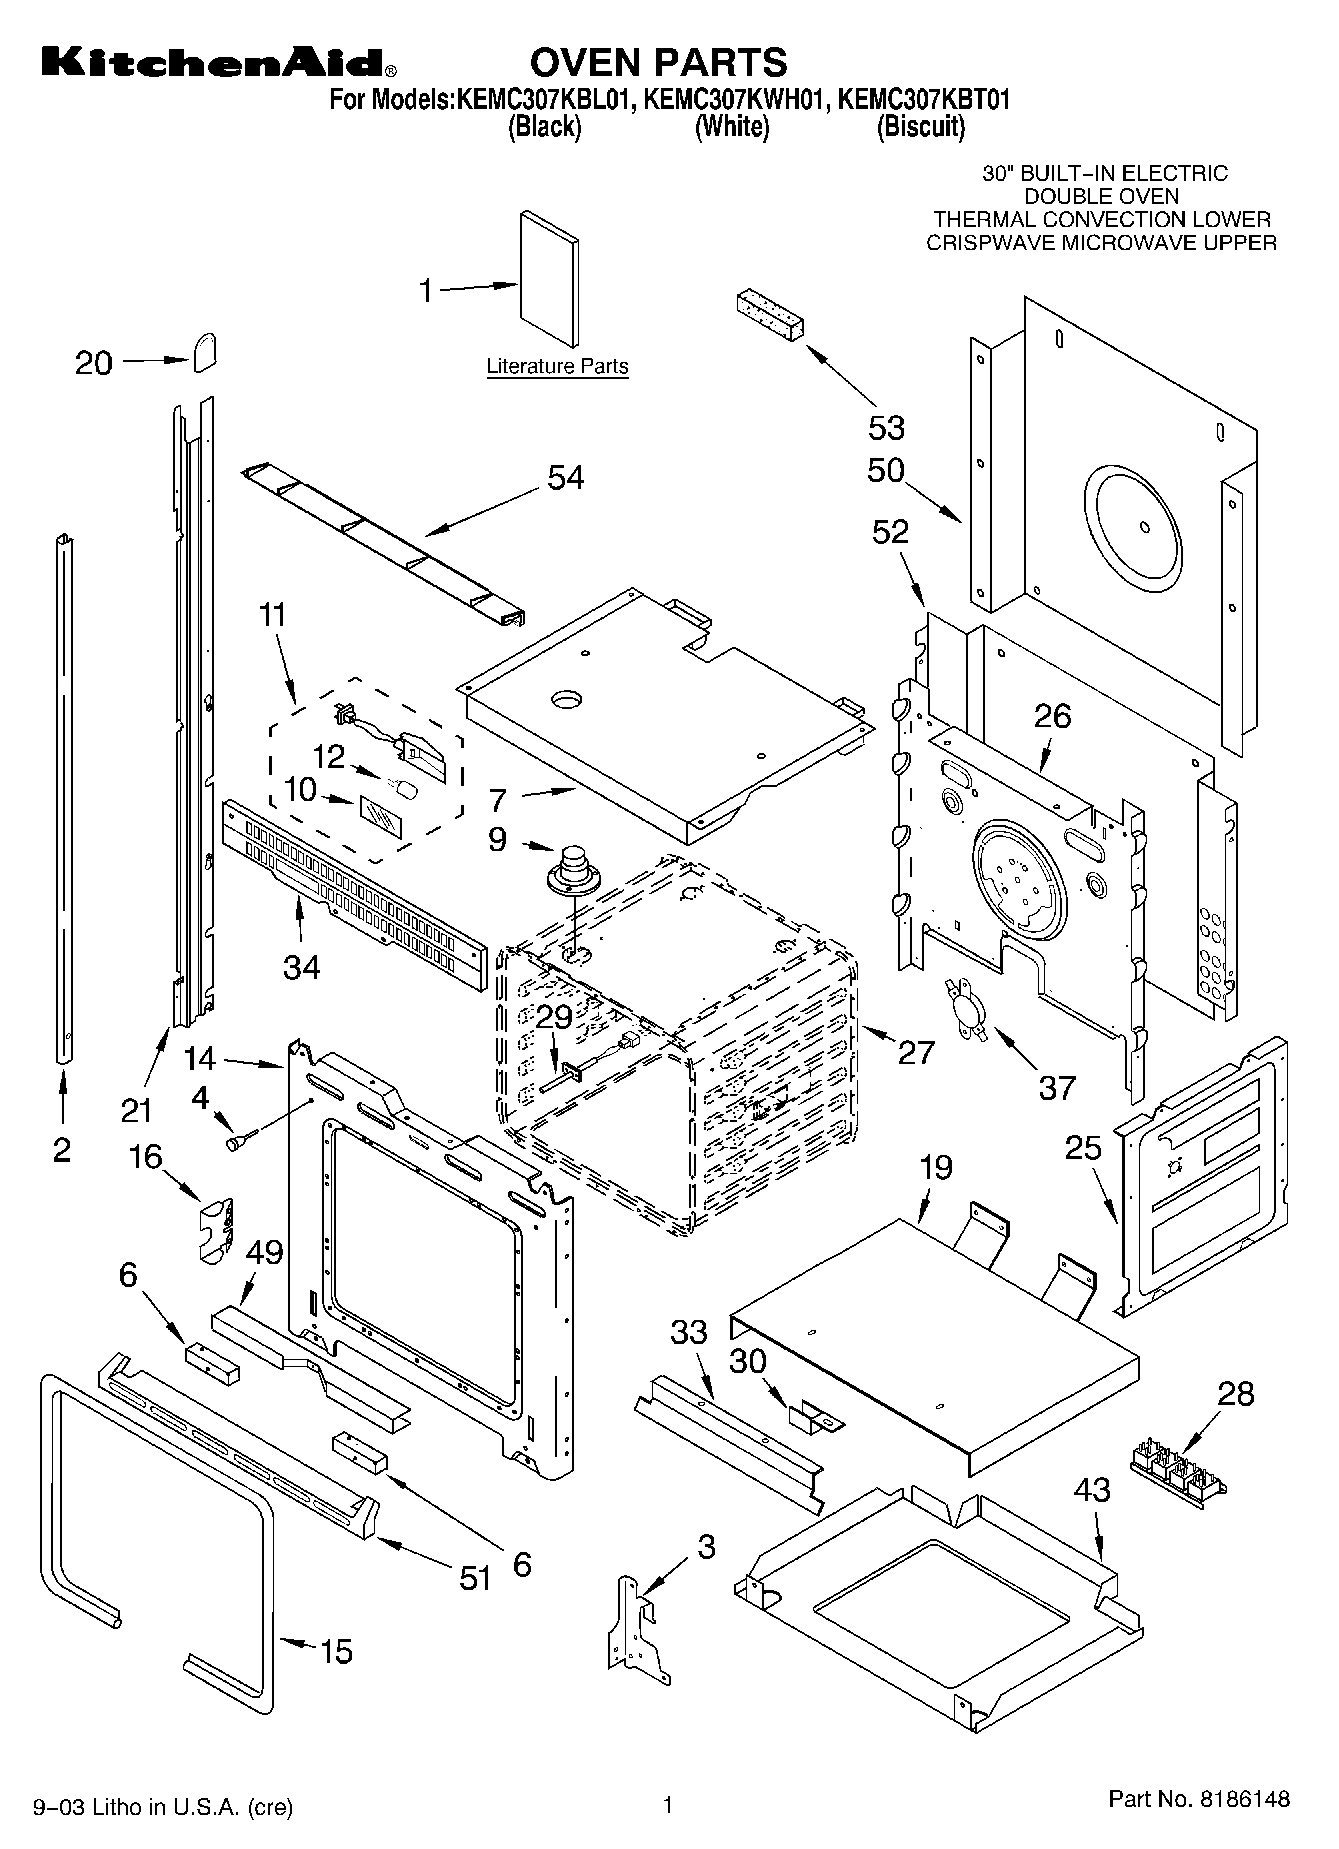 02 - OVEN PARTS